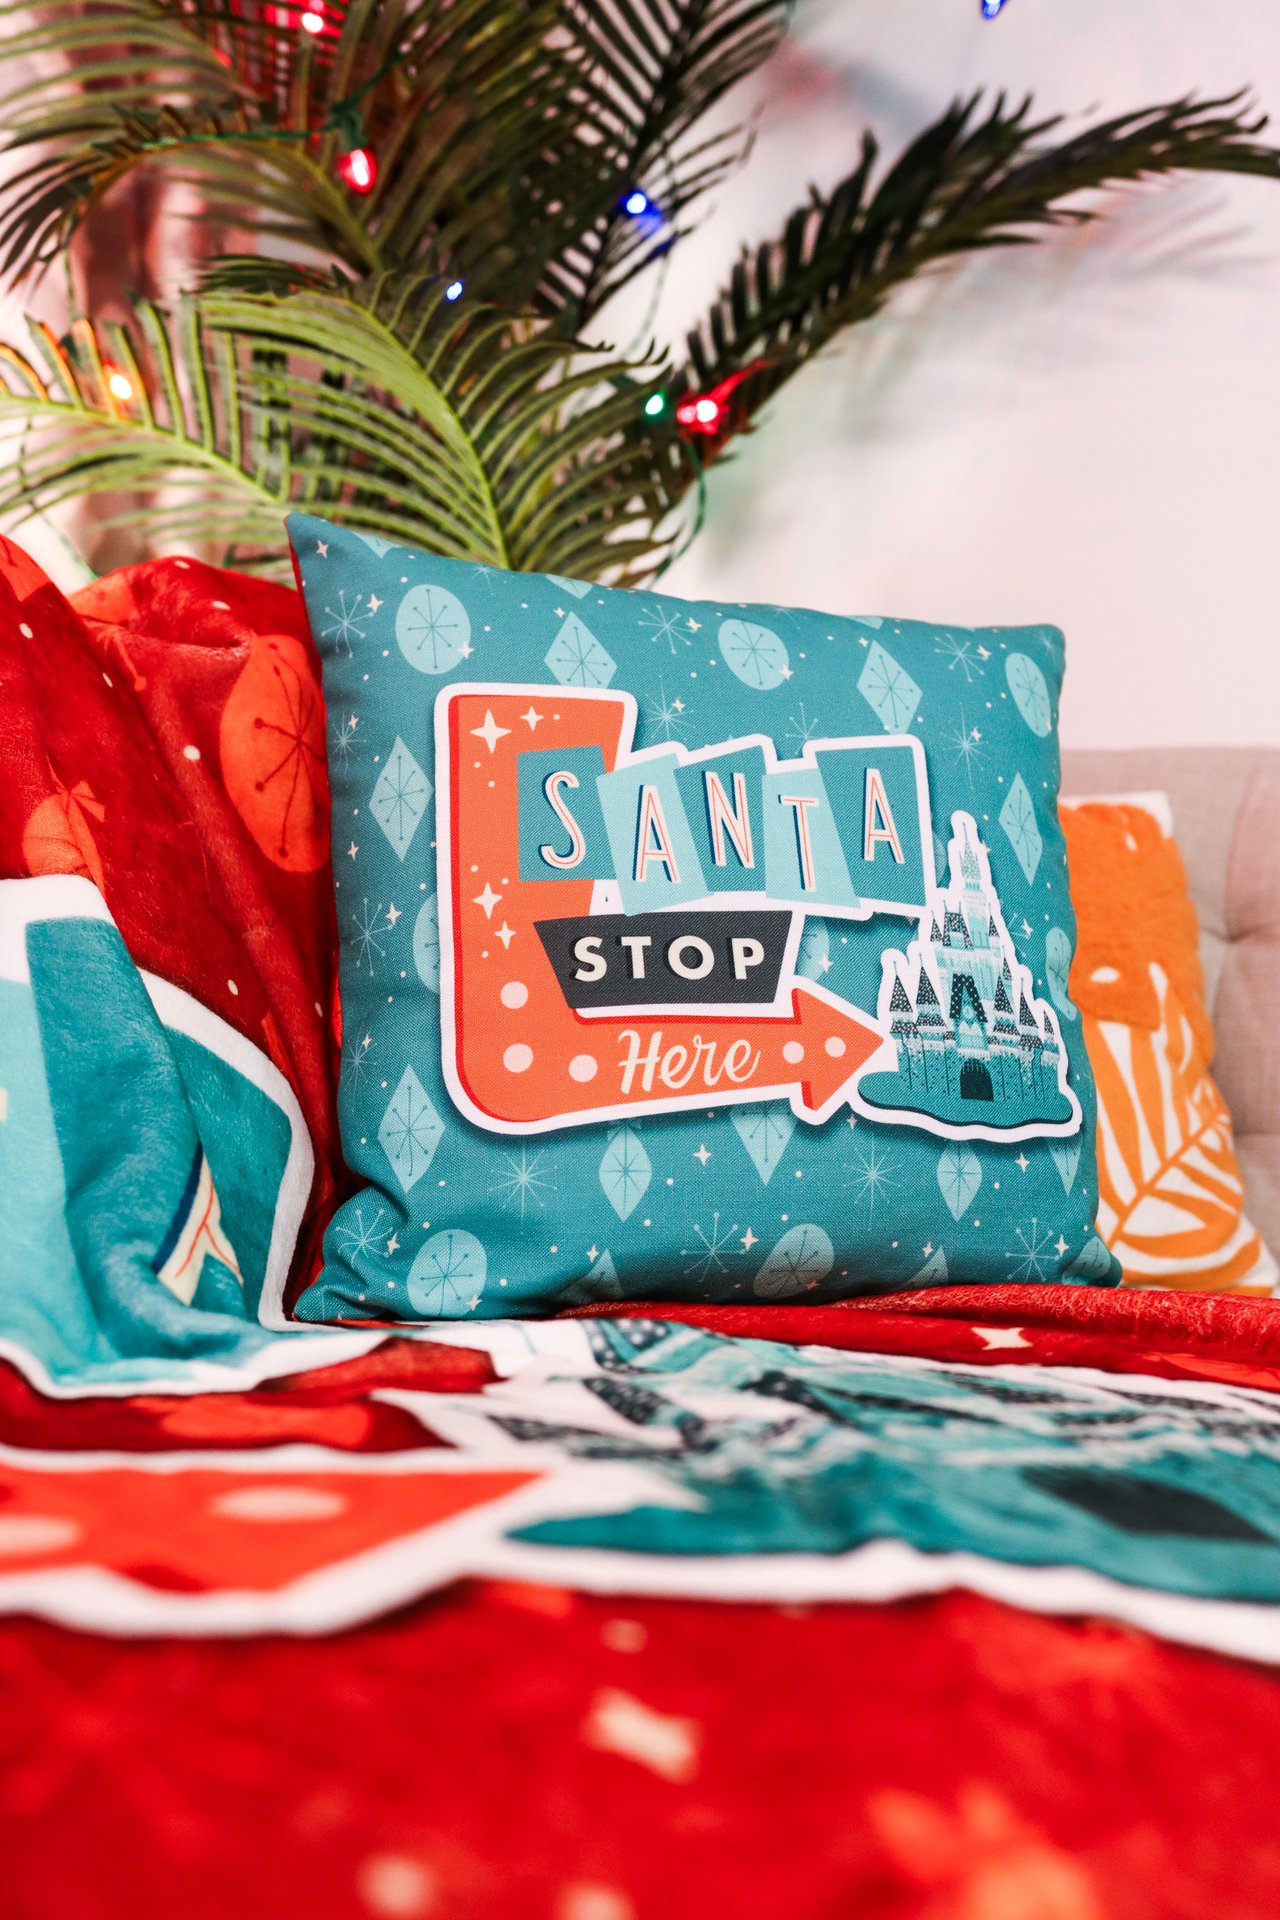 Our Santa Stop Here pillow laying on a matching blanket in front of a palm tree wrapped in lights.